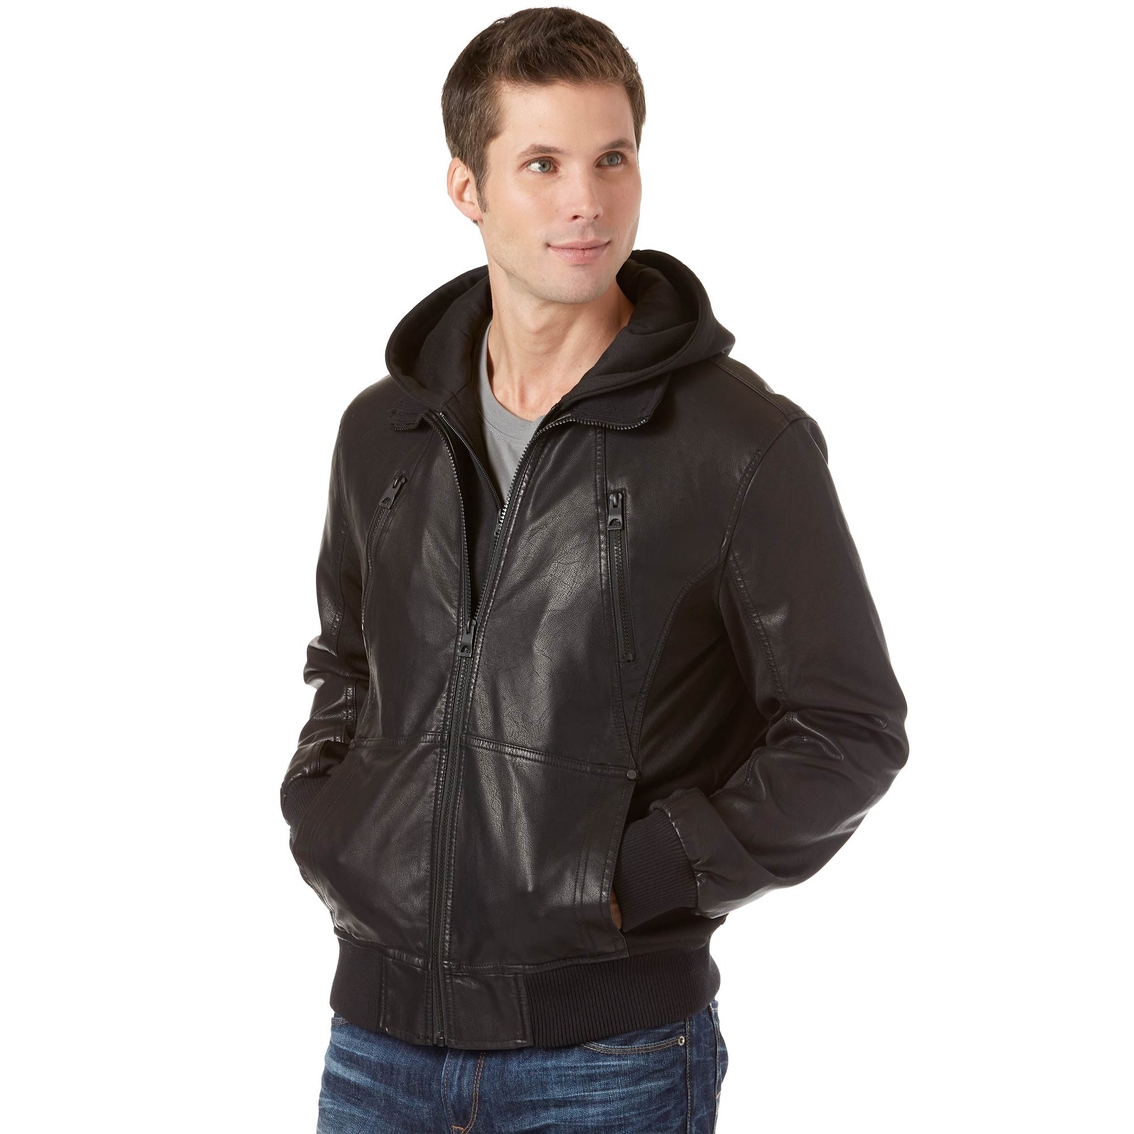 Guess Outerwear Faux Leather Bomber Jacket | Jackets | Clothing ...